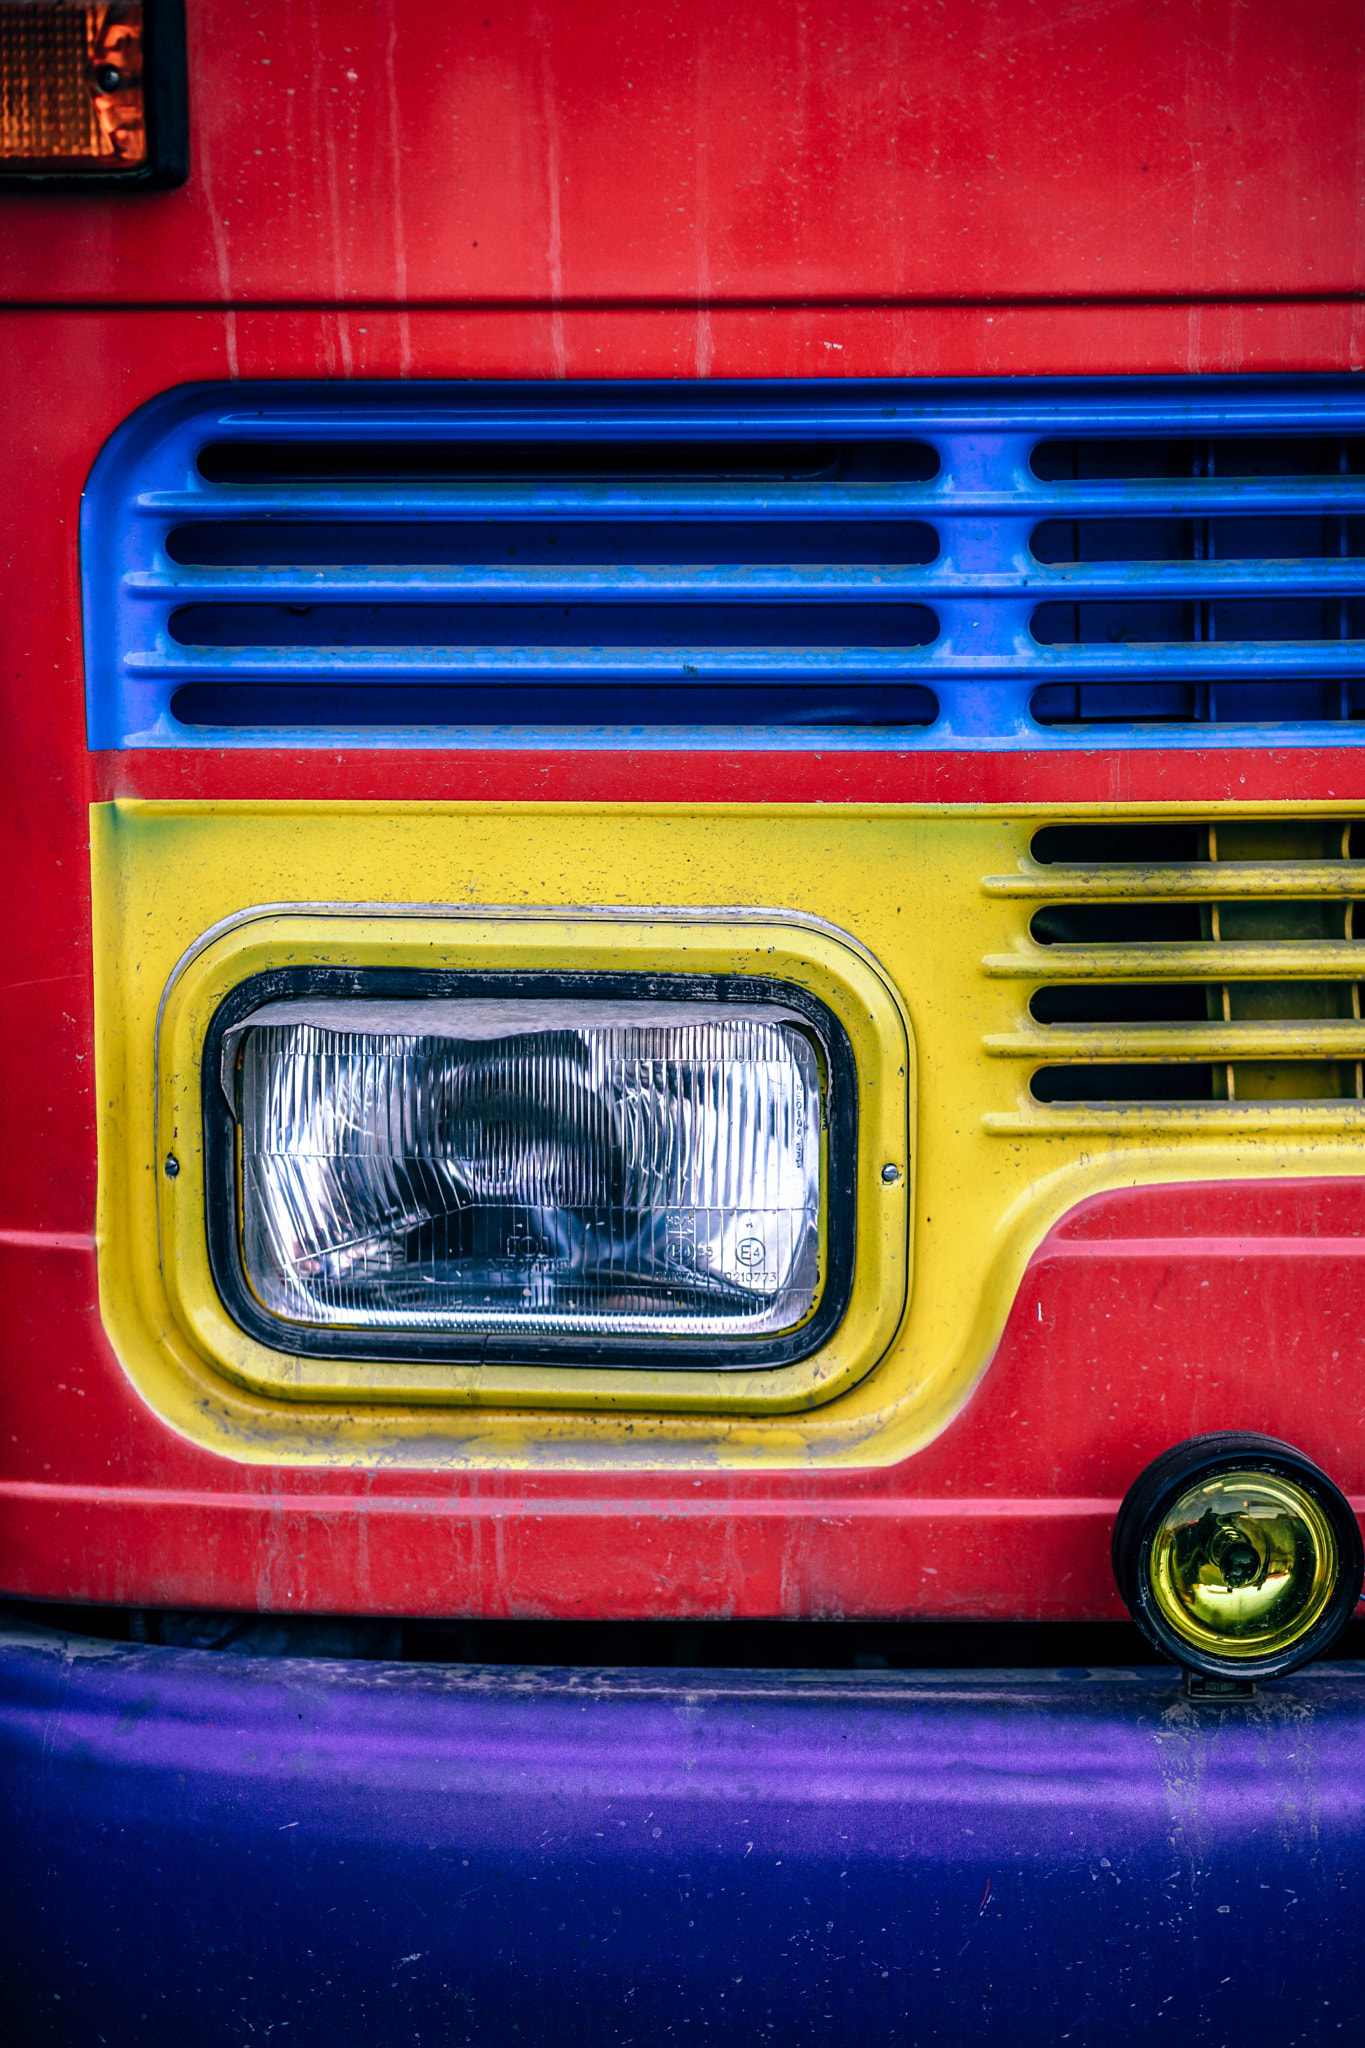 Sony a7 II + DT 85mm F1.8 SAM sample photo. Colorful truck headlight photography